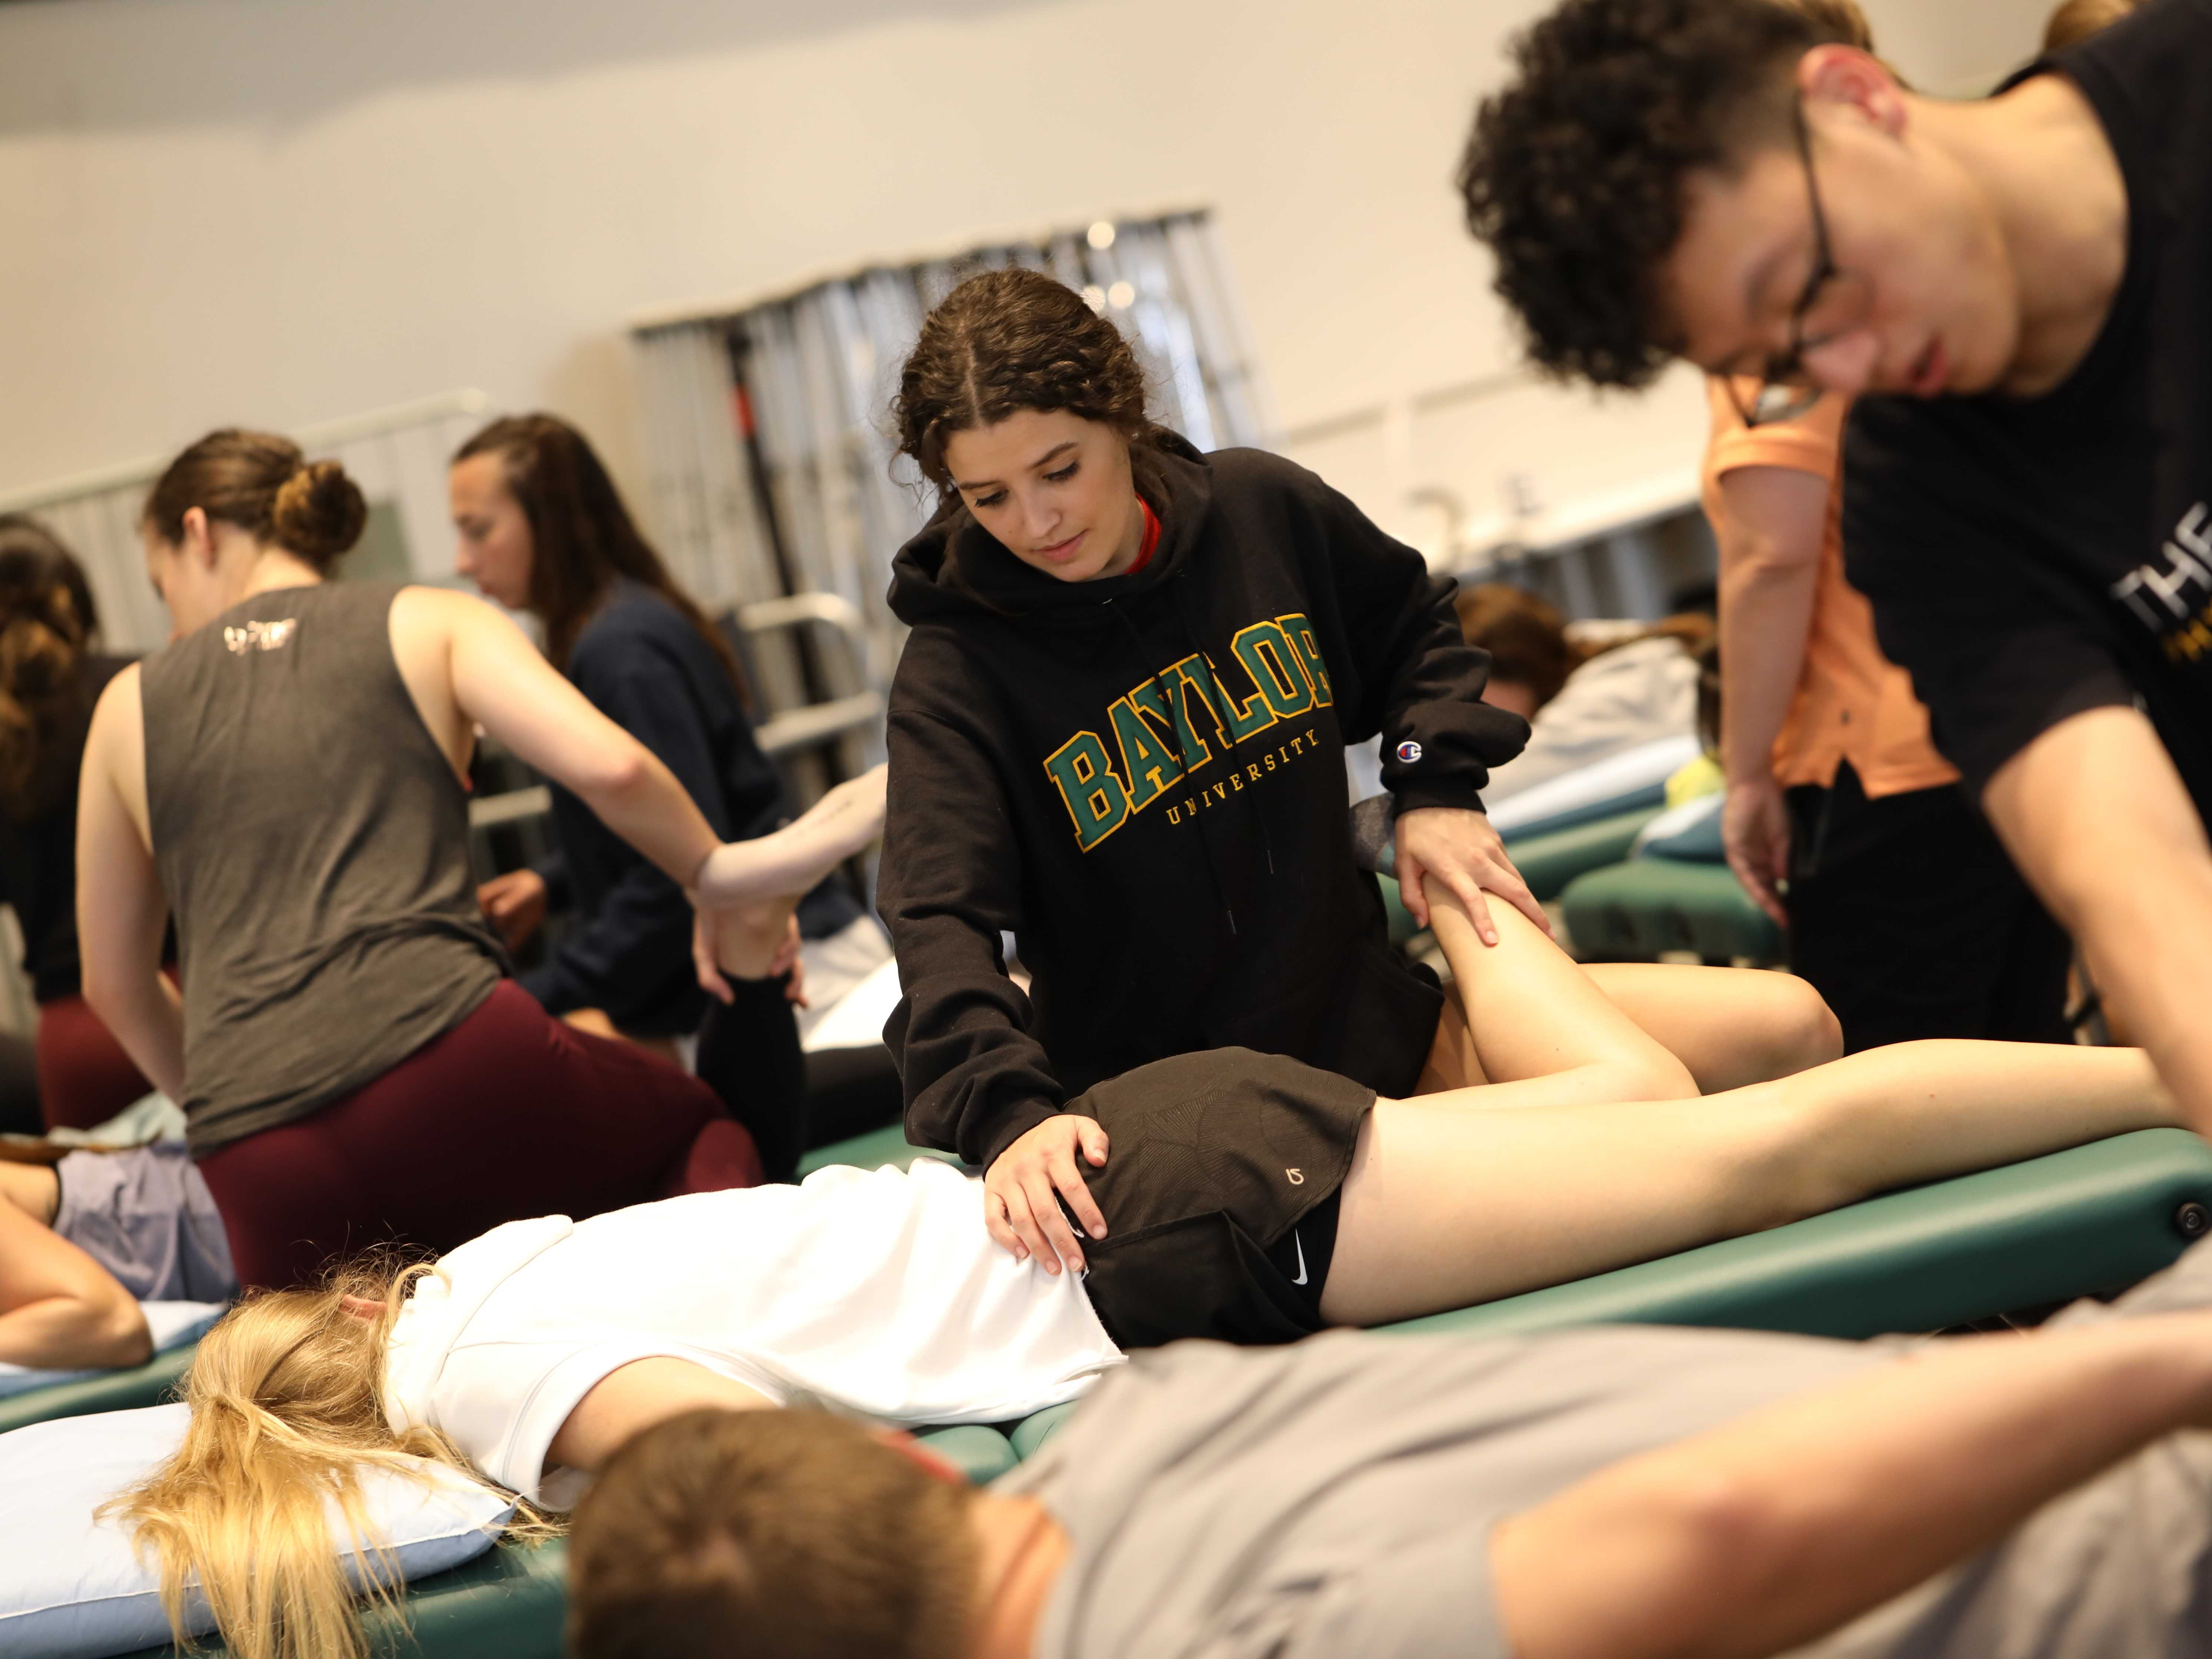 Baylor Physical and Occupational Therapy graduate students practicing their skill in an on-campus lab immersion session.